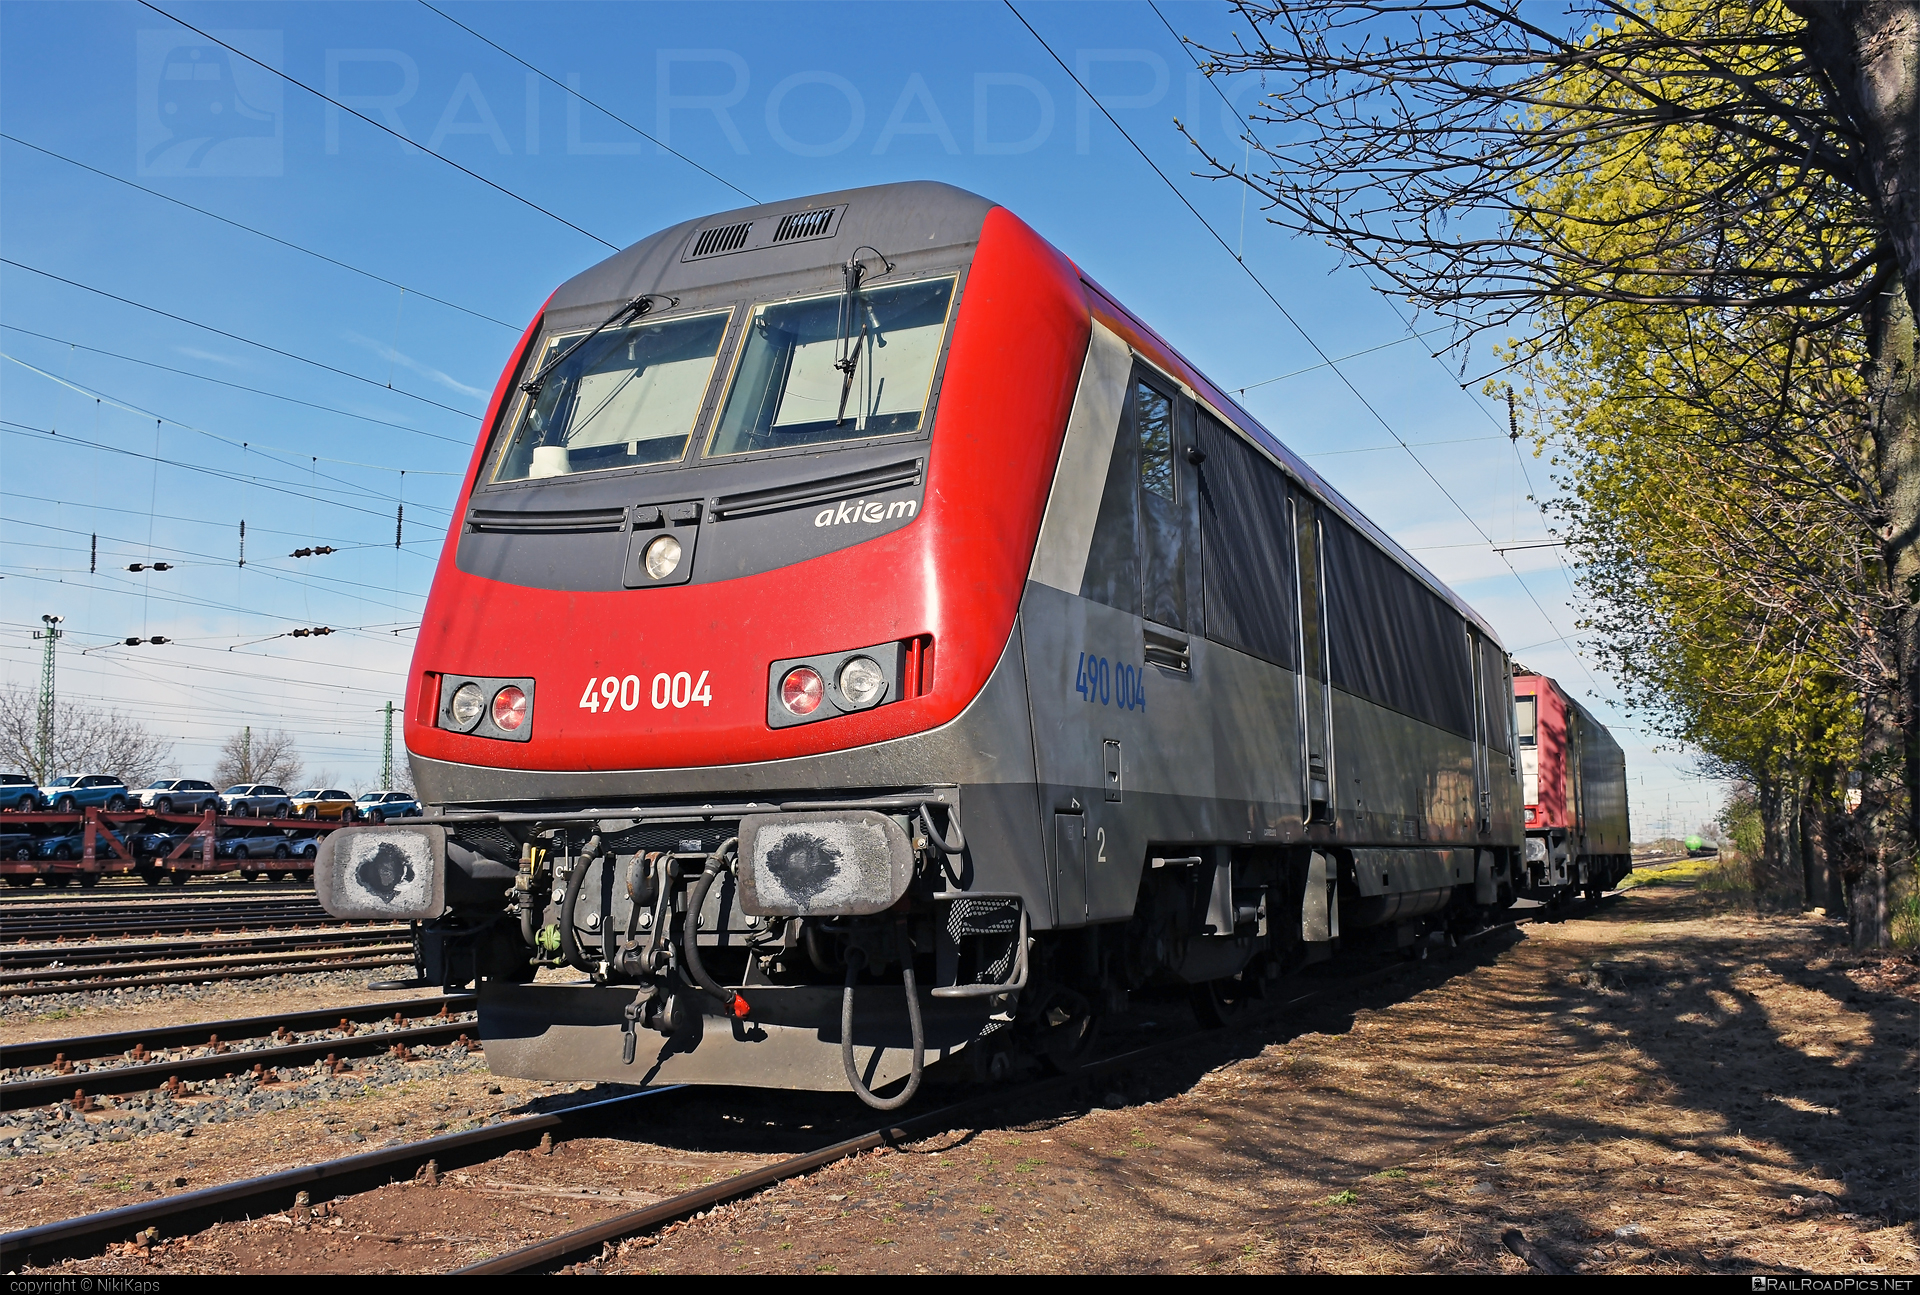 GEC Alsthom SNCF Class BB 36000 `Astride` - 490 004 operated by Akiem SAS #akiem #akiemsas #alstom #alstomAstride #alstomBB36000 #bb36000 #bb36000astride #gecAlsthomAstride #gecAlsthomBB36000 #gecalsthom